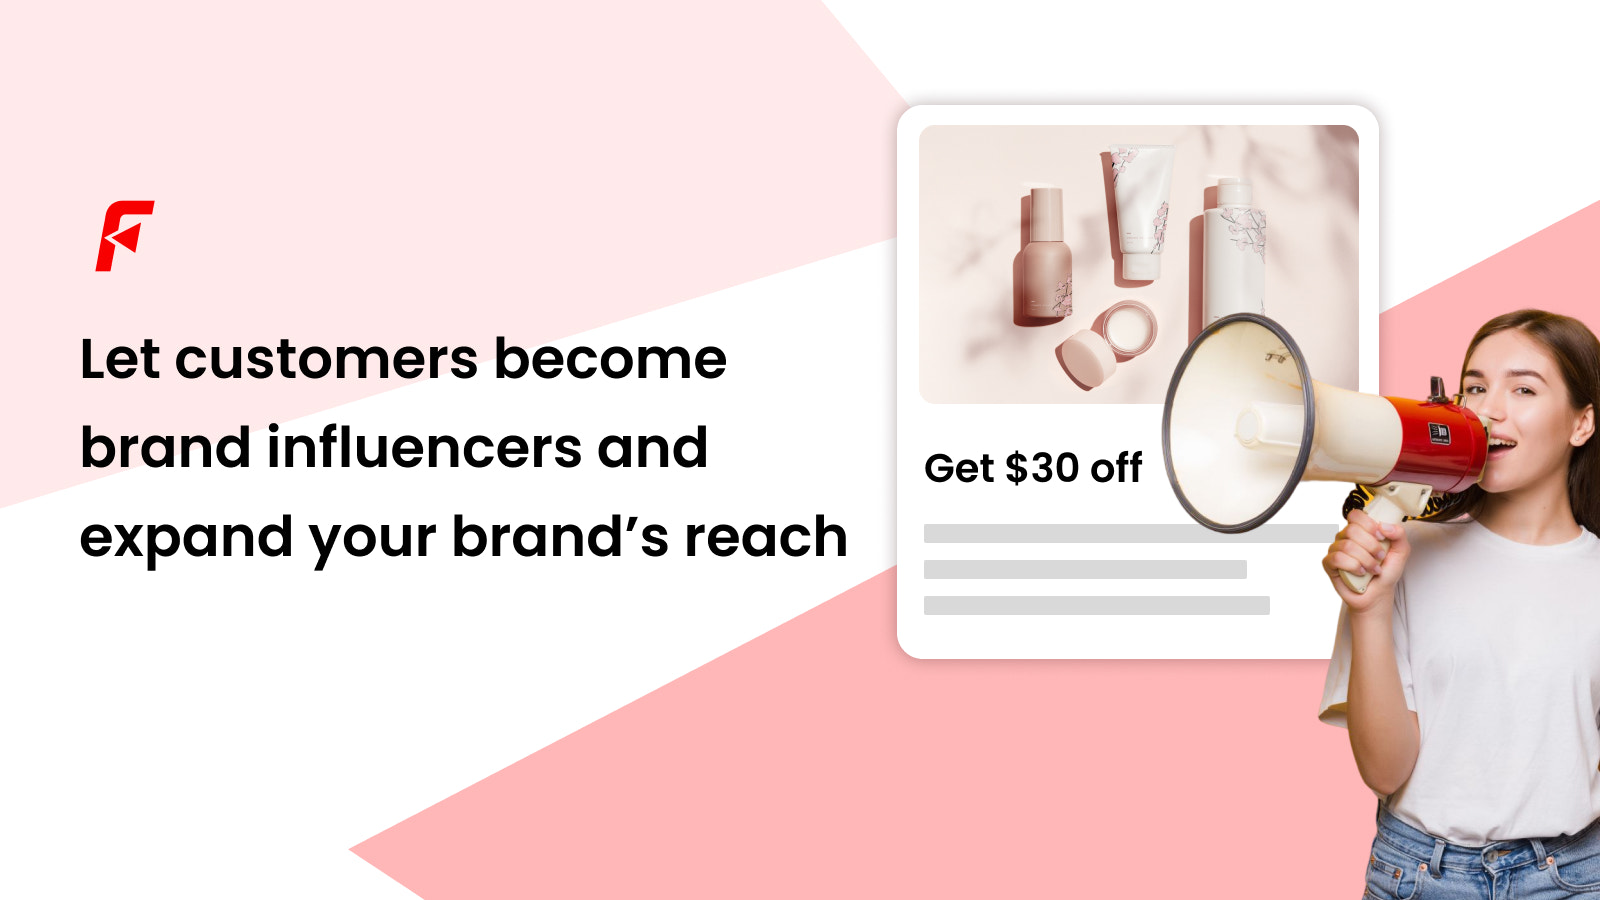 Let customers become brand influencers and expand your brand’s